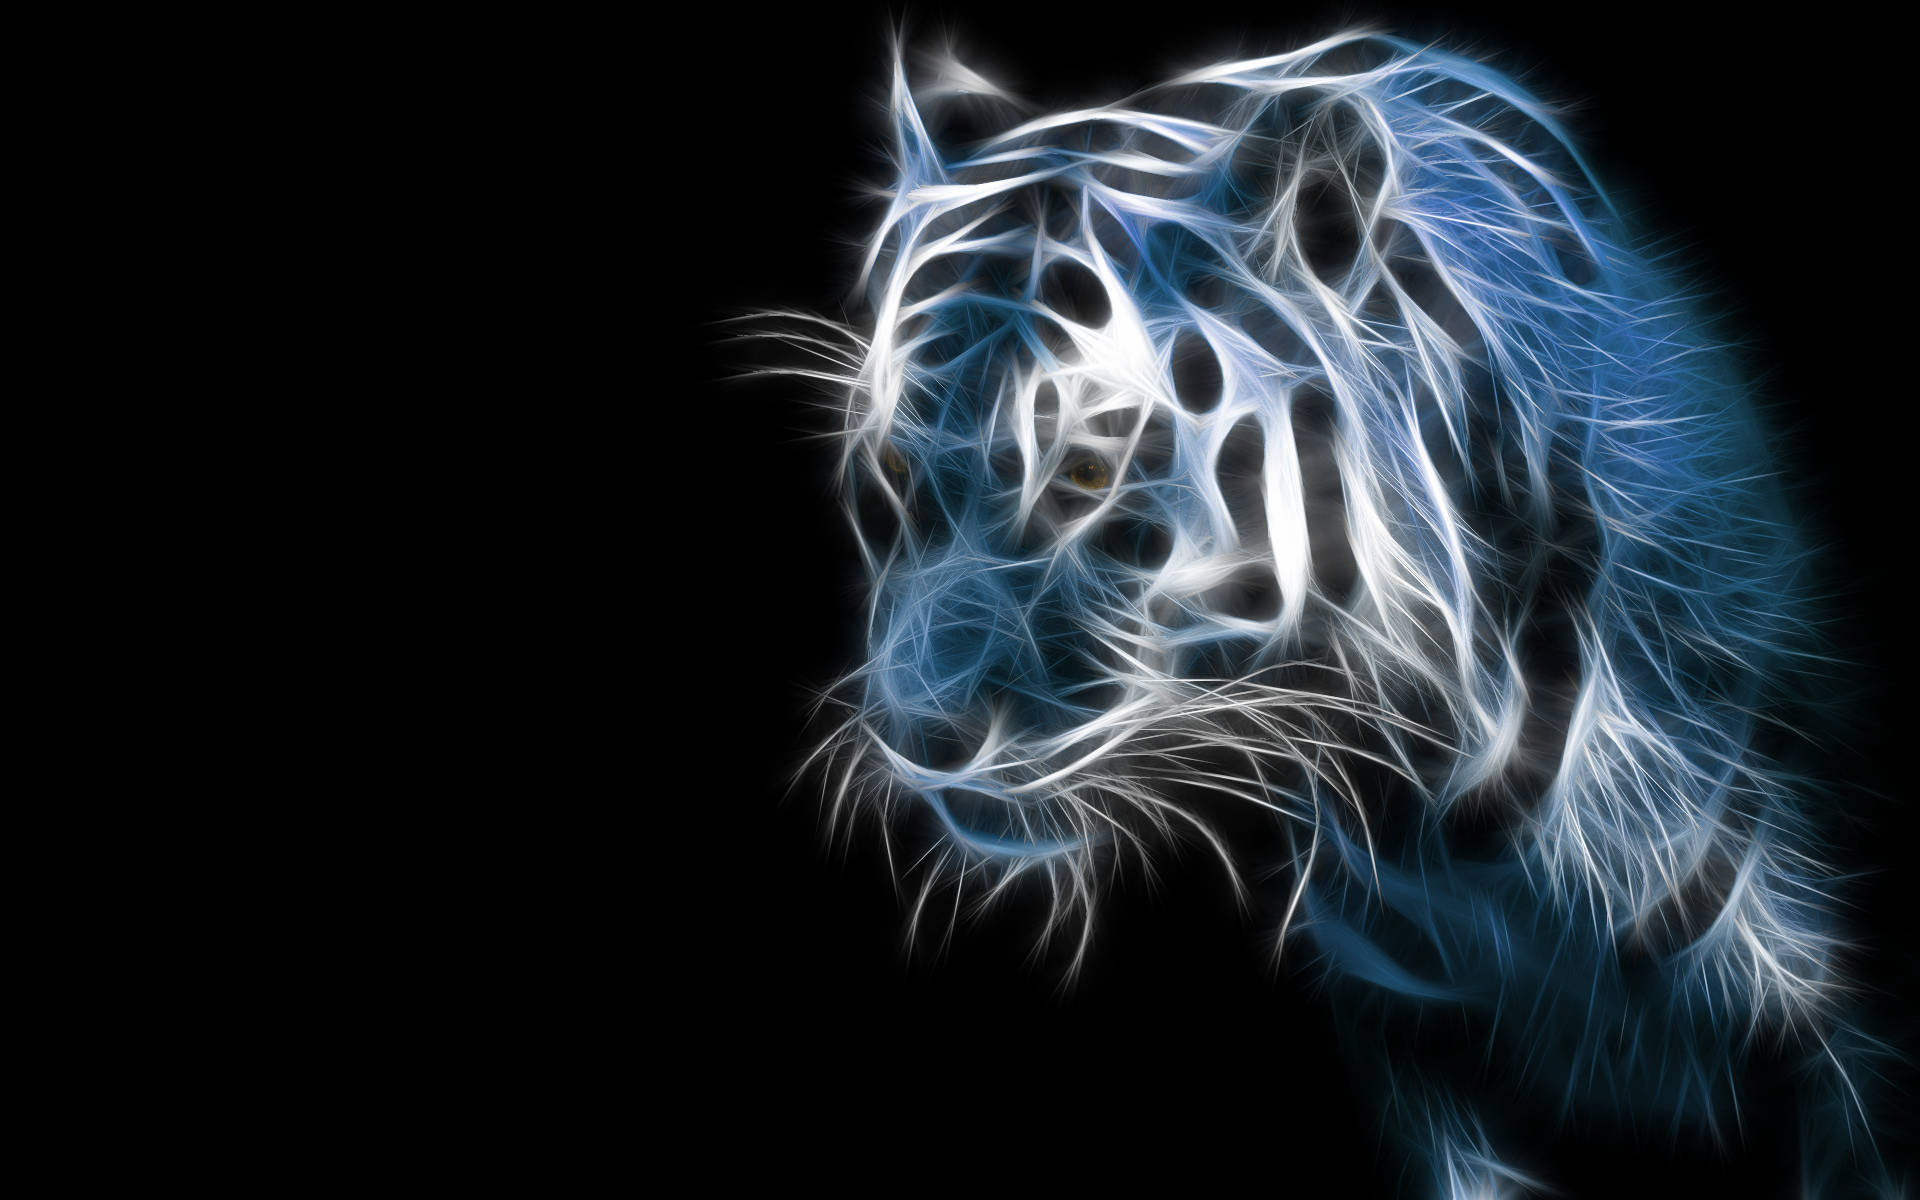 Tiger Iphone wallpaper for desktop and mobile phone